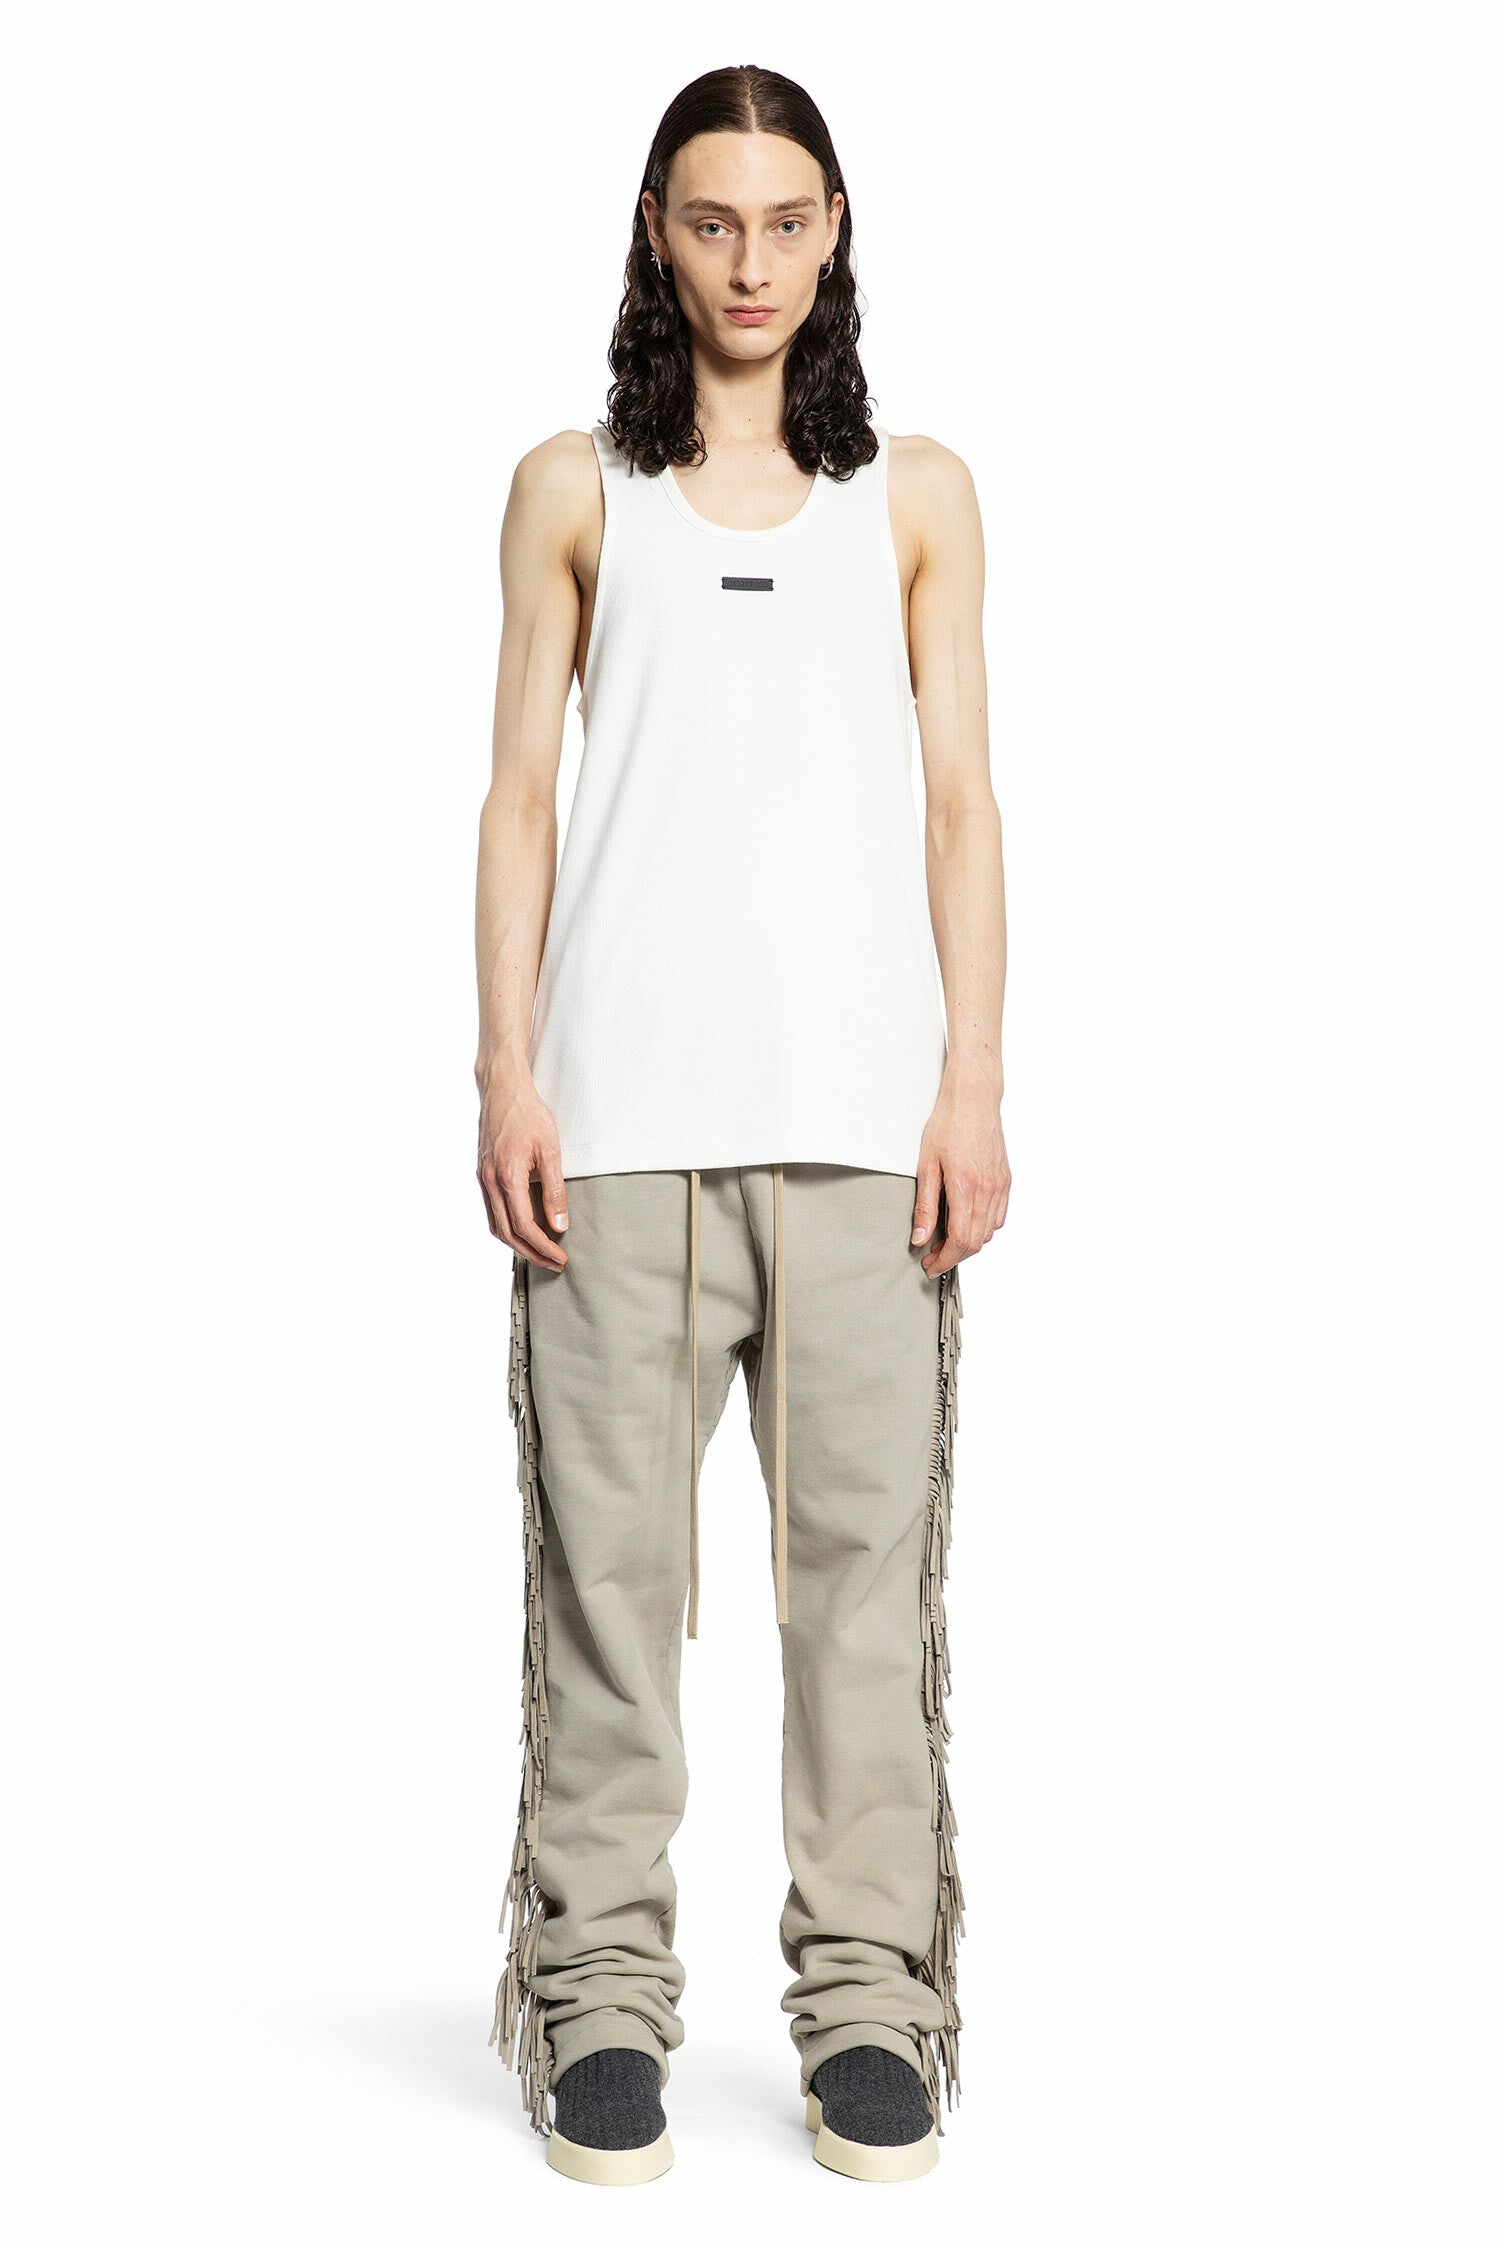 FEAR OF GOD MAN WHITE T-SHIRTS